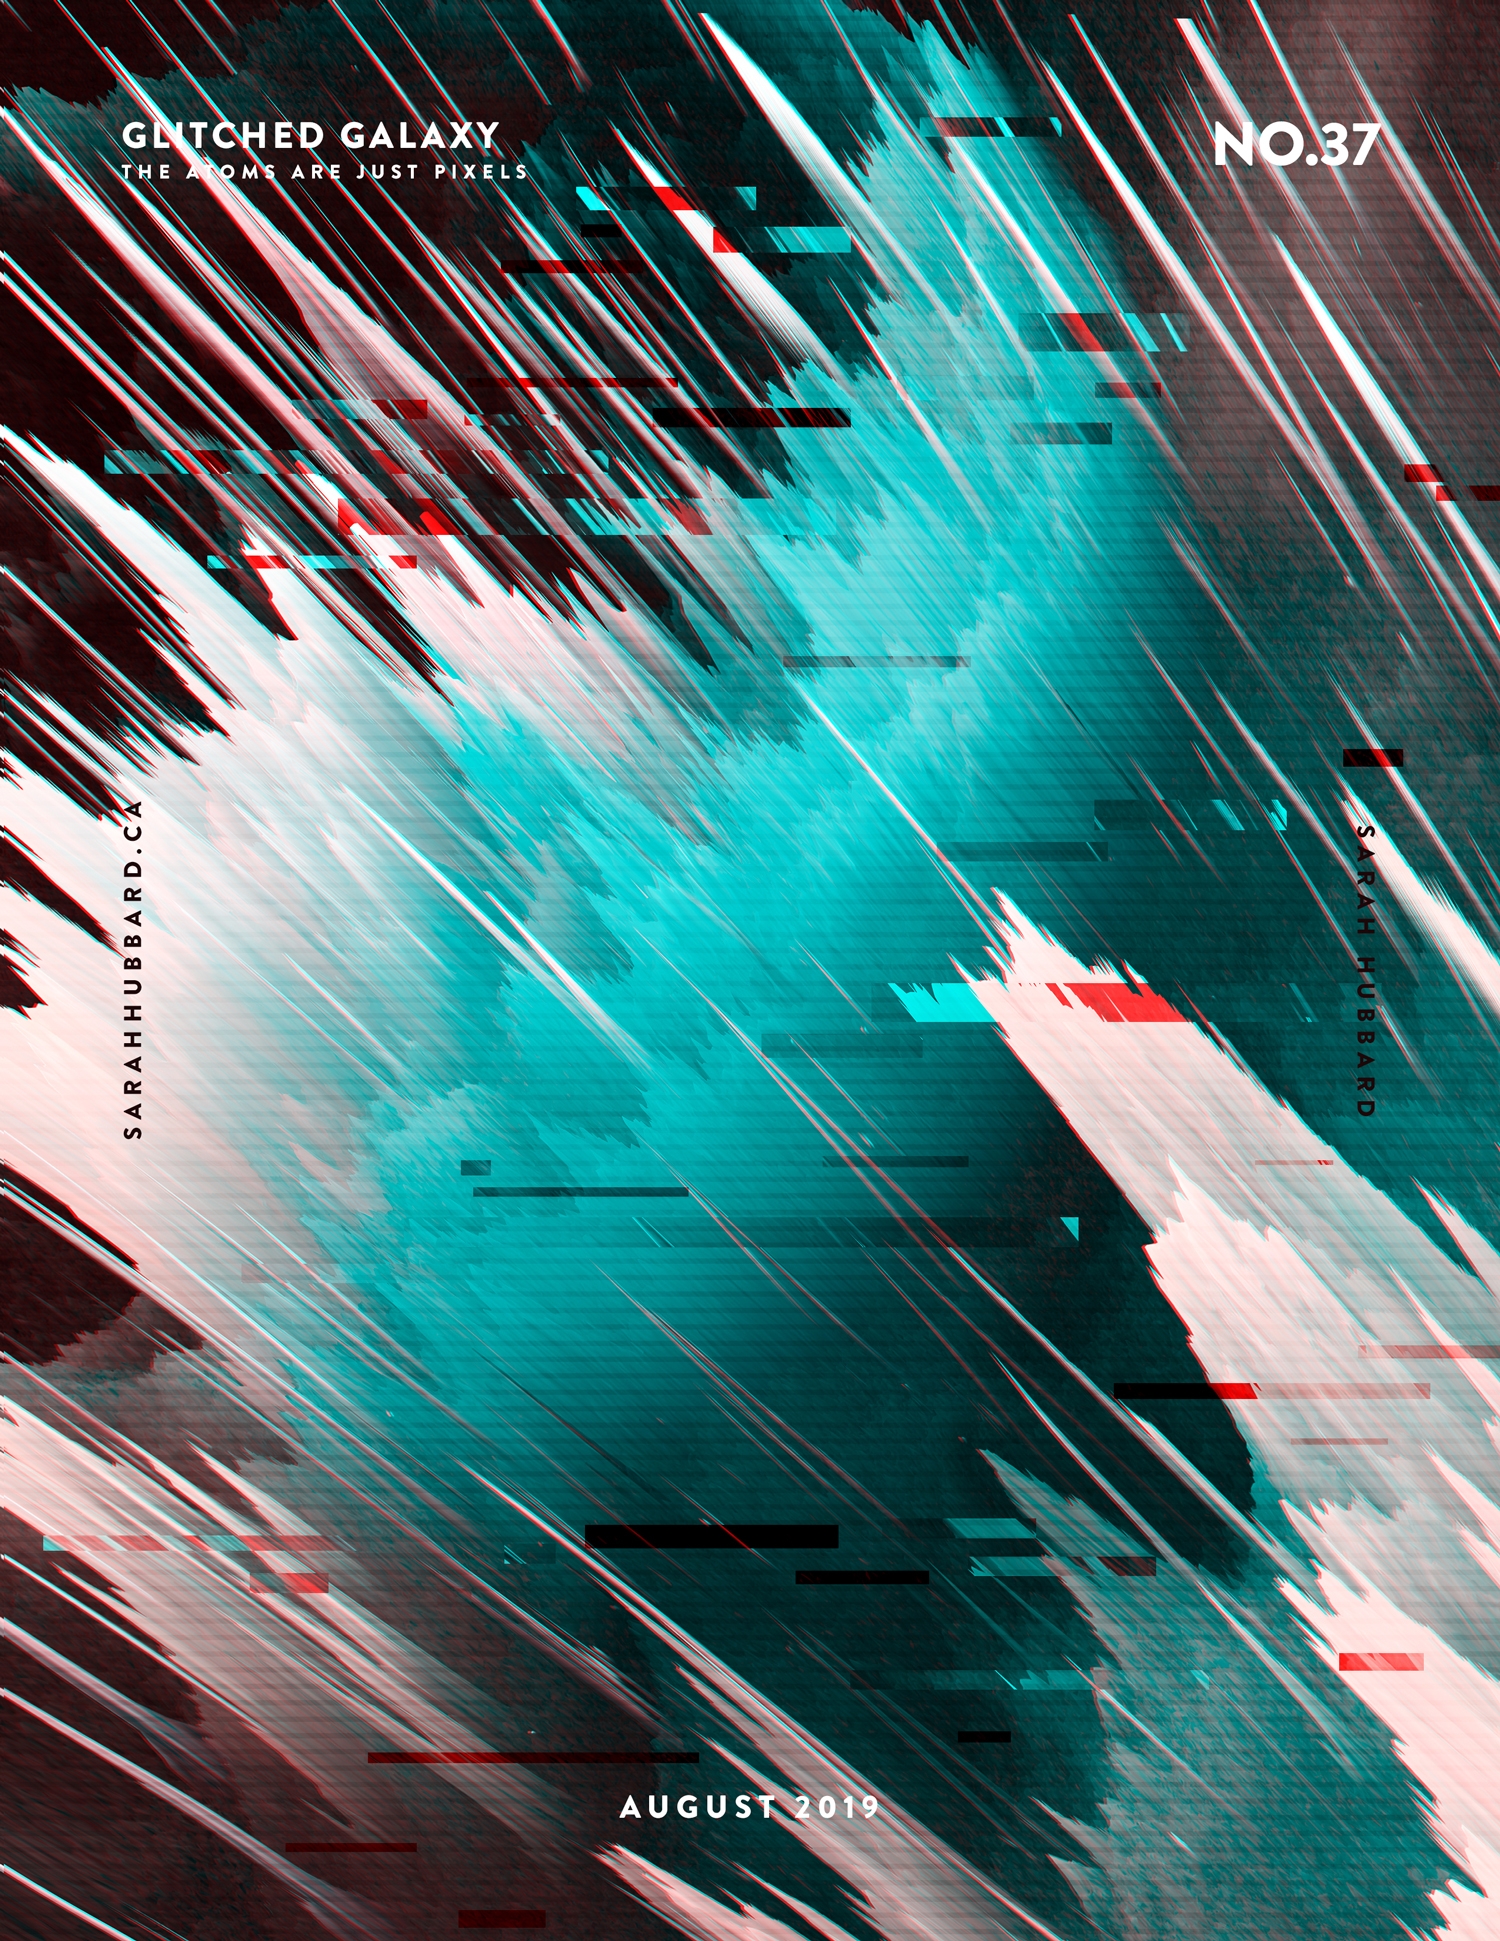 Glitched Galaxy Poster